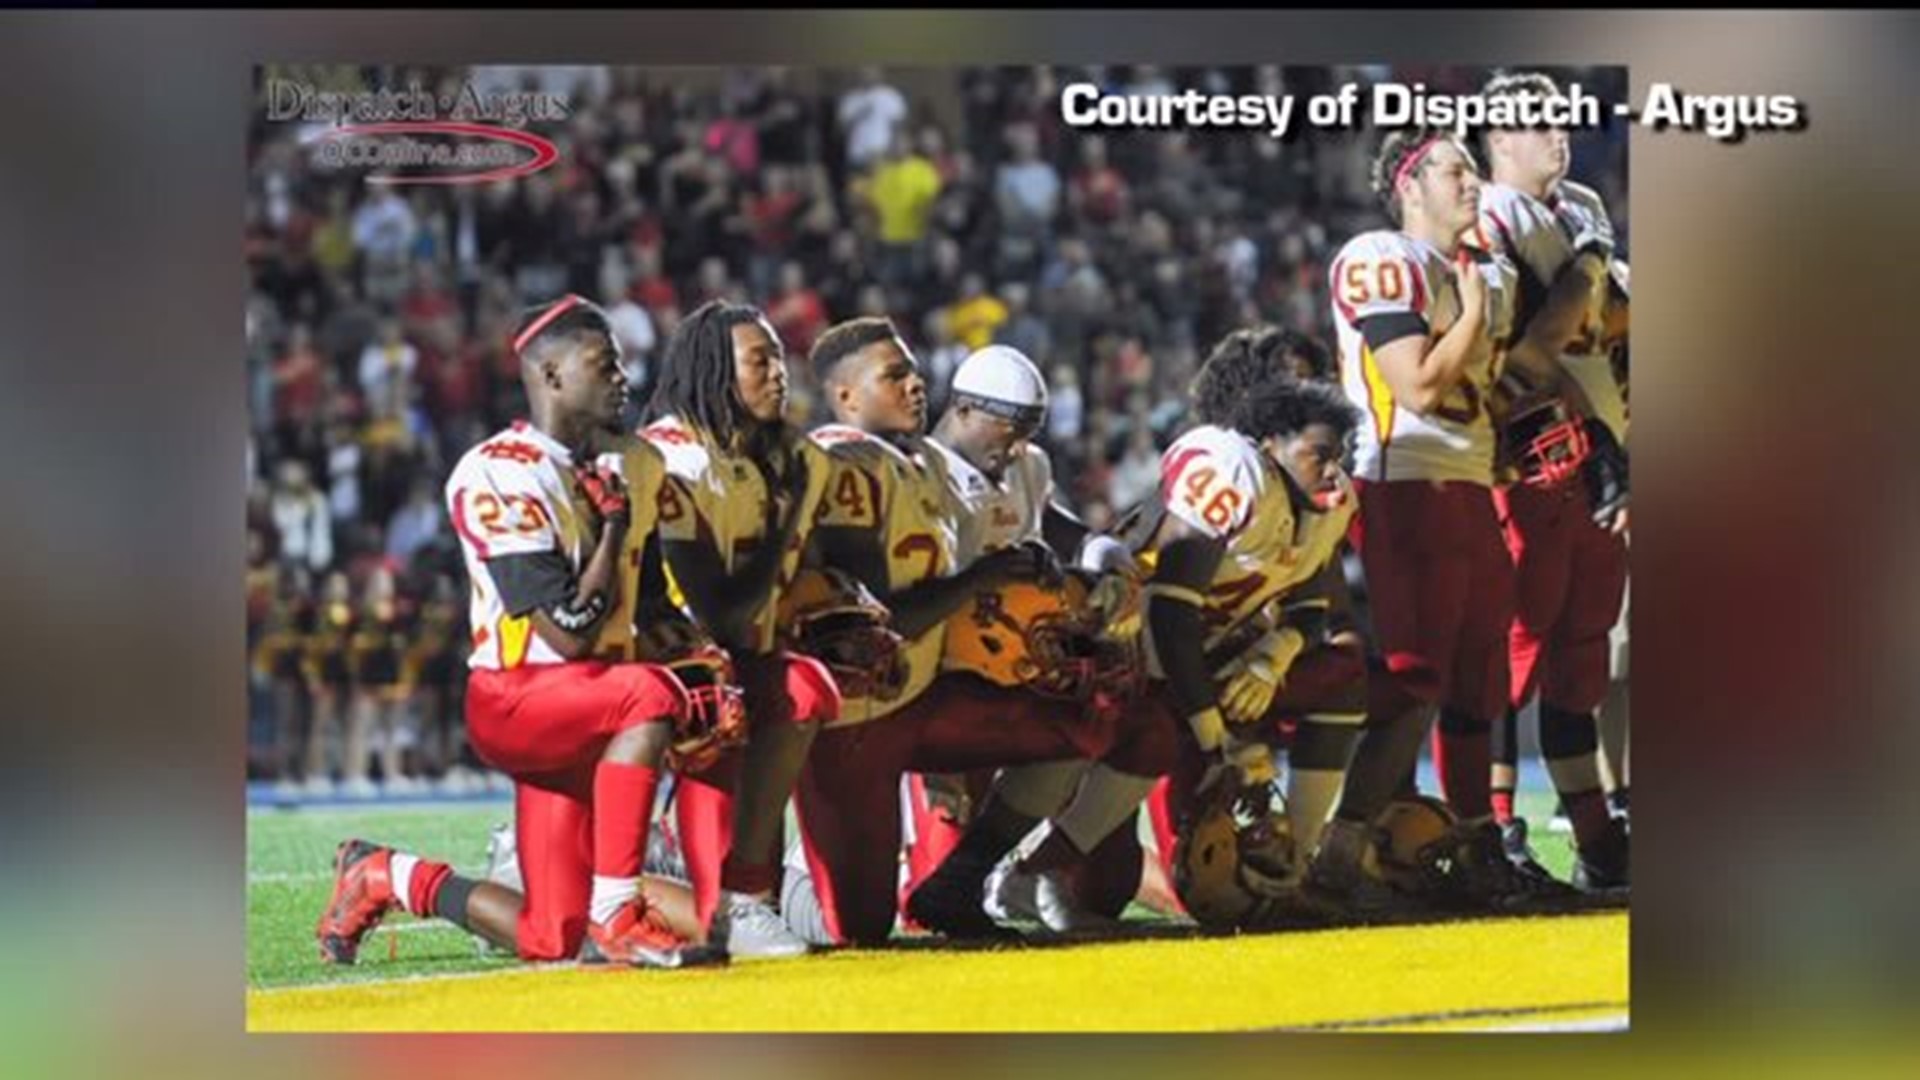 Rock Island HS leader supports players` anthem protest